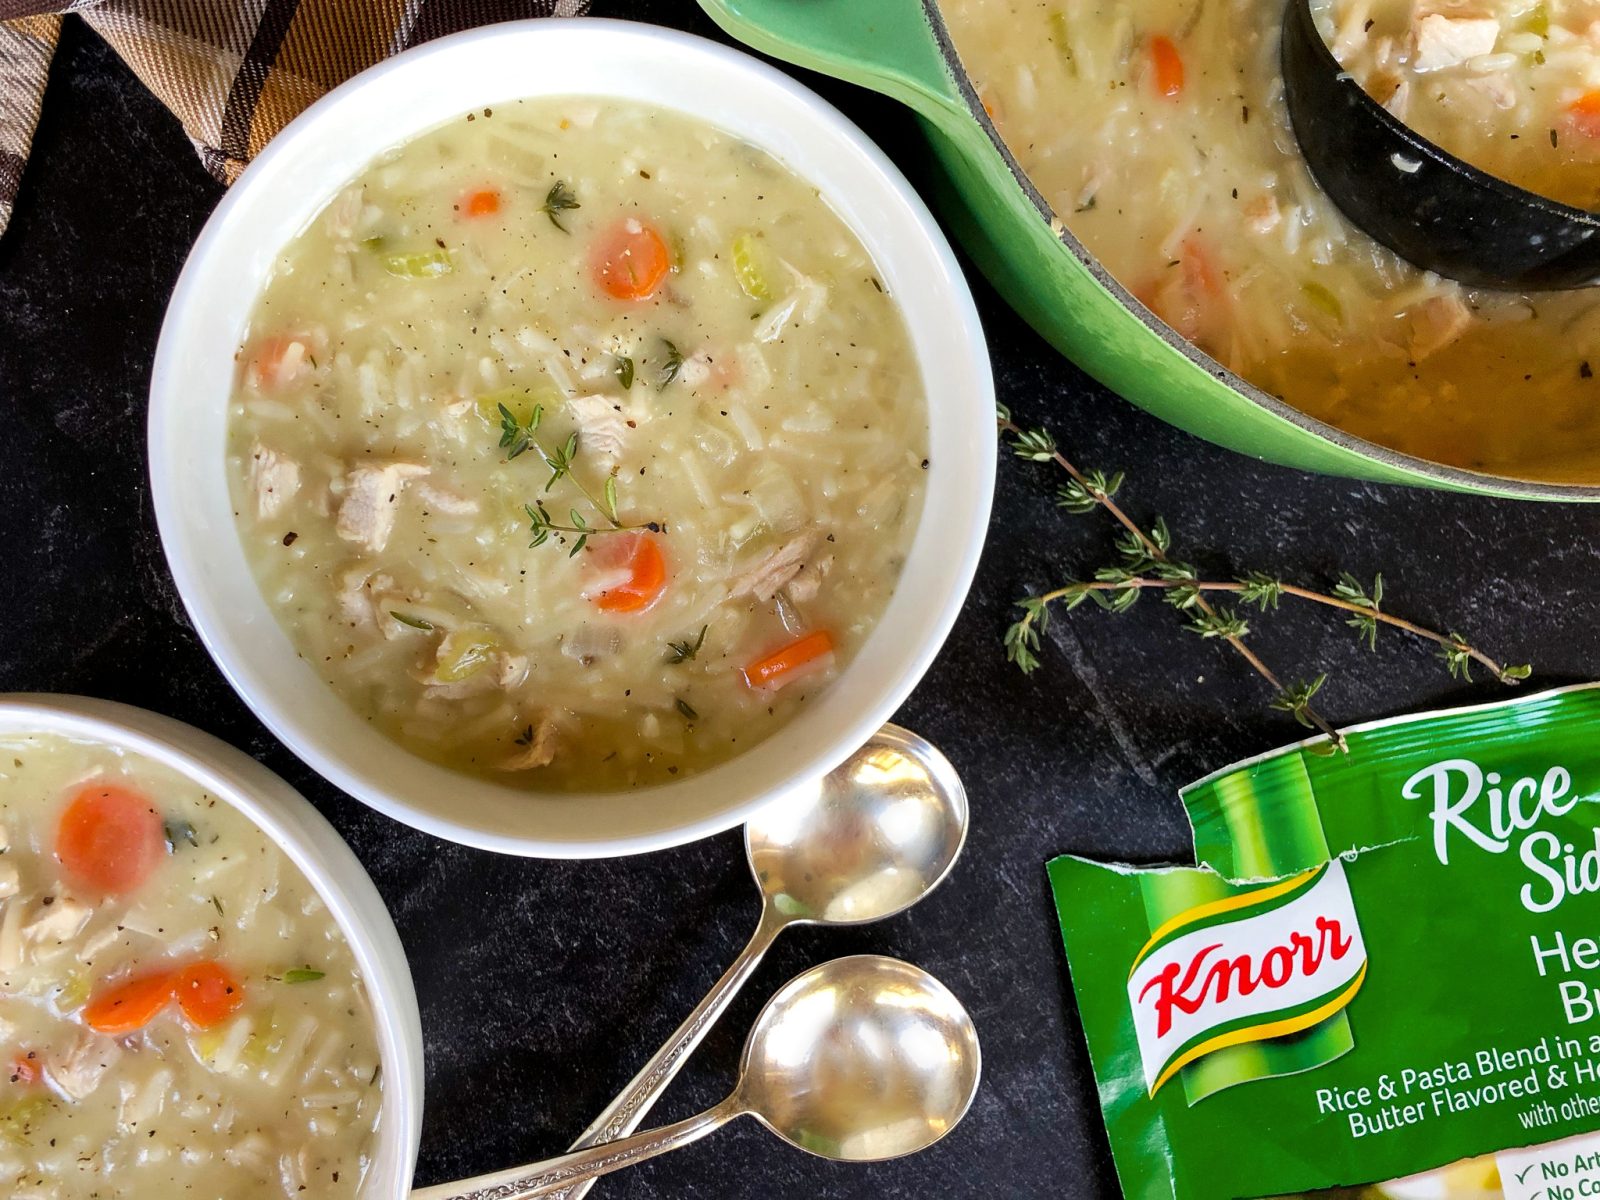 Grab Some Knorr Rice Mixes To Have Handy For My Leftover Turkey And Rice Soup – The Perfect After-Holiday Meal!